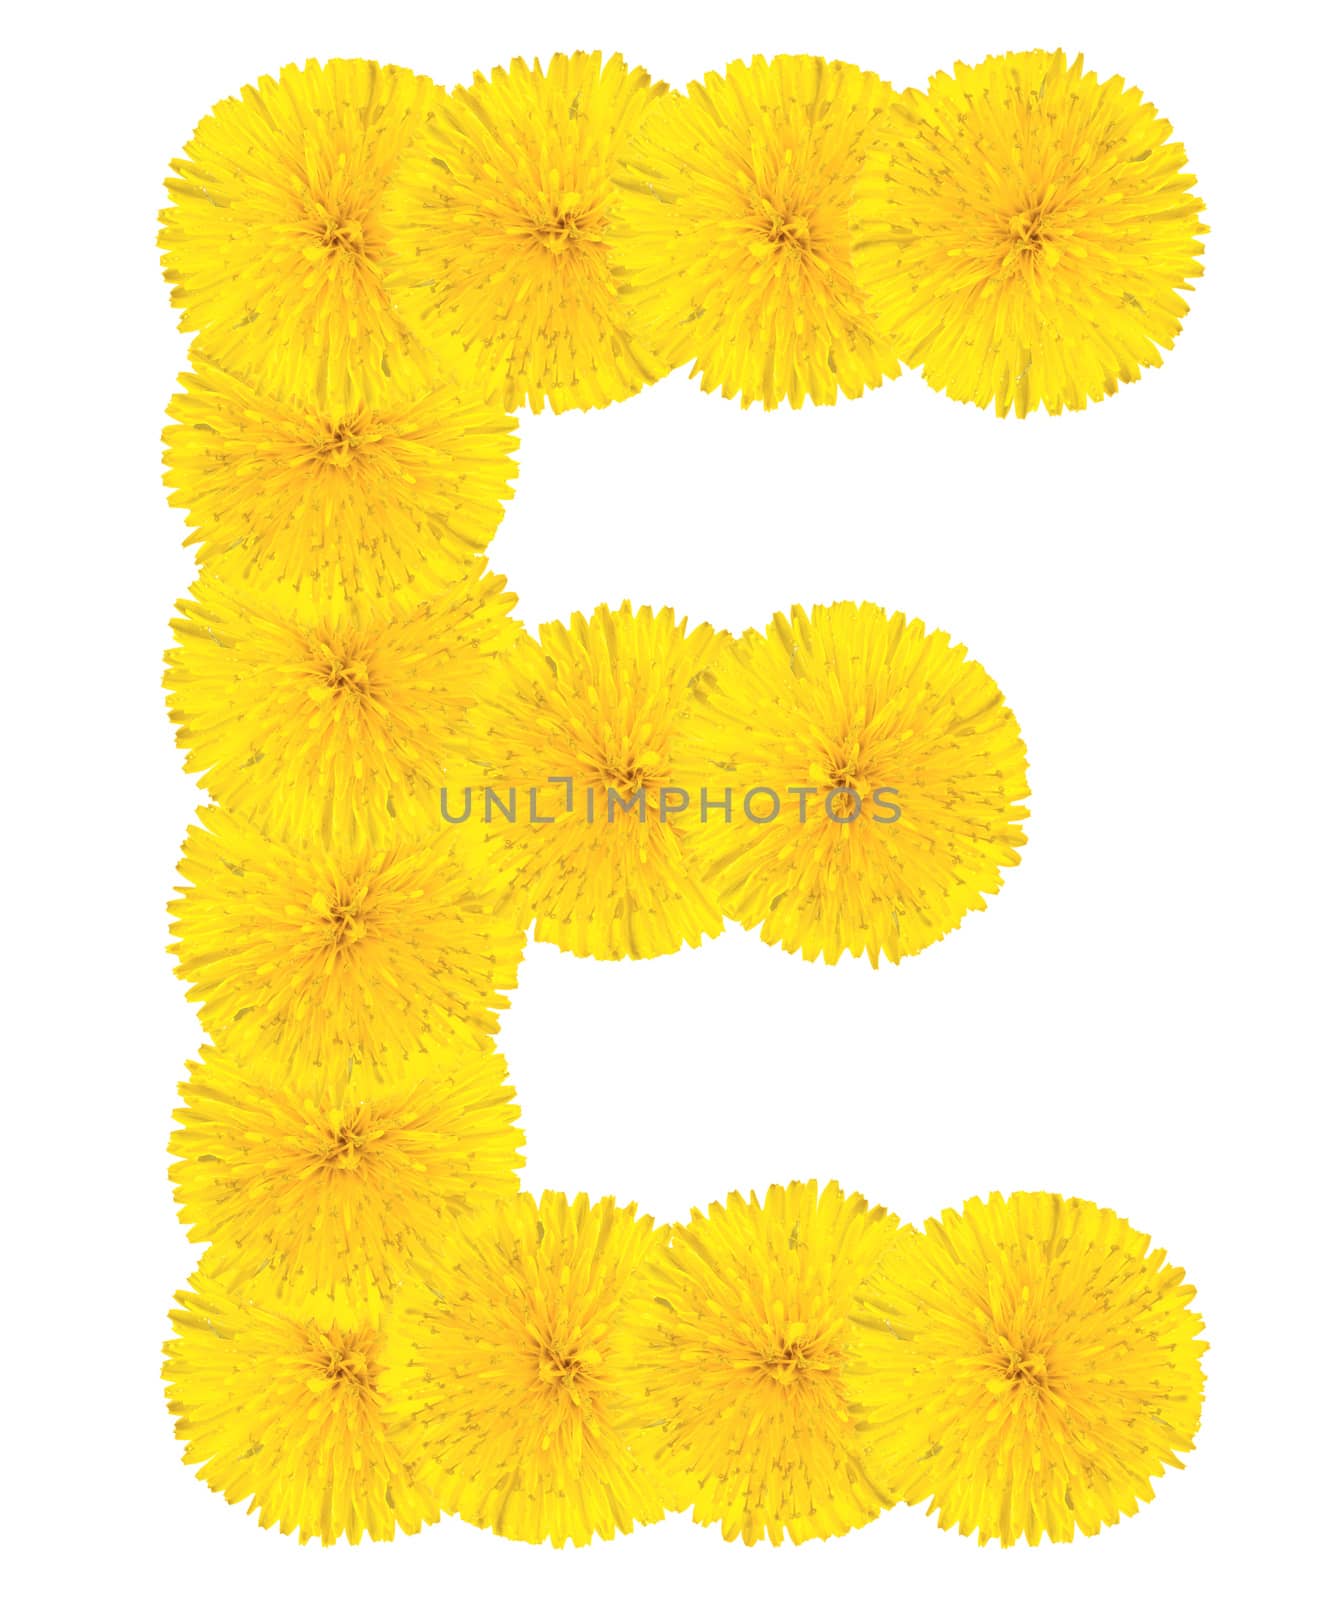 Letter E made from dandelions by Valengilda